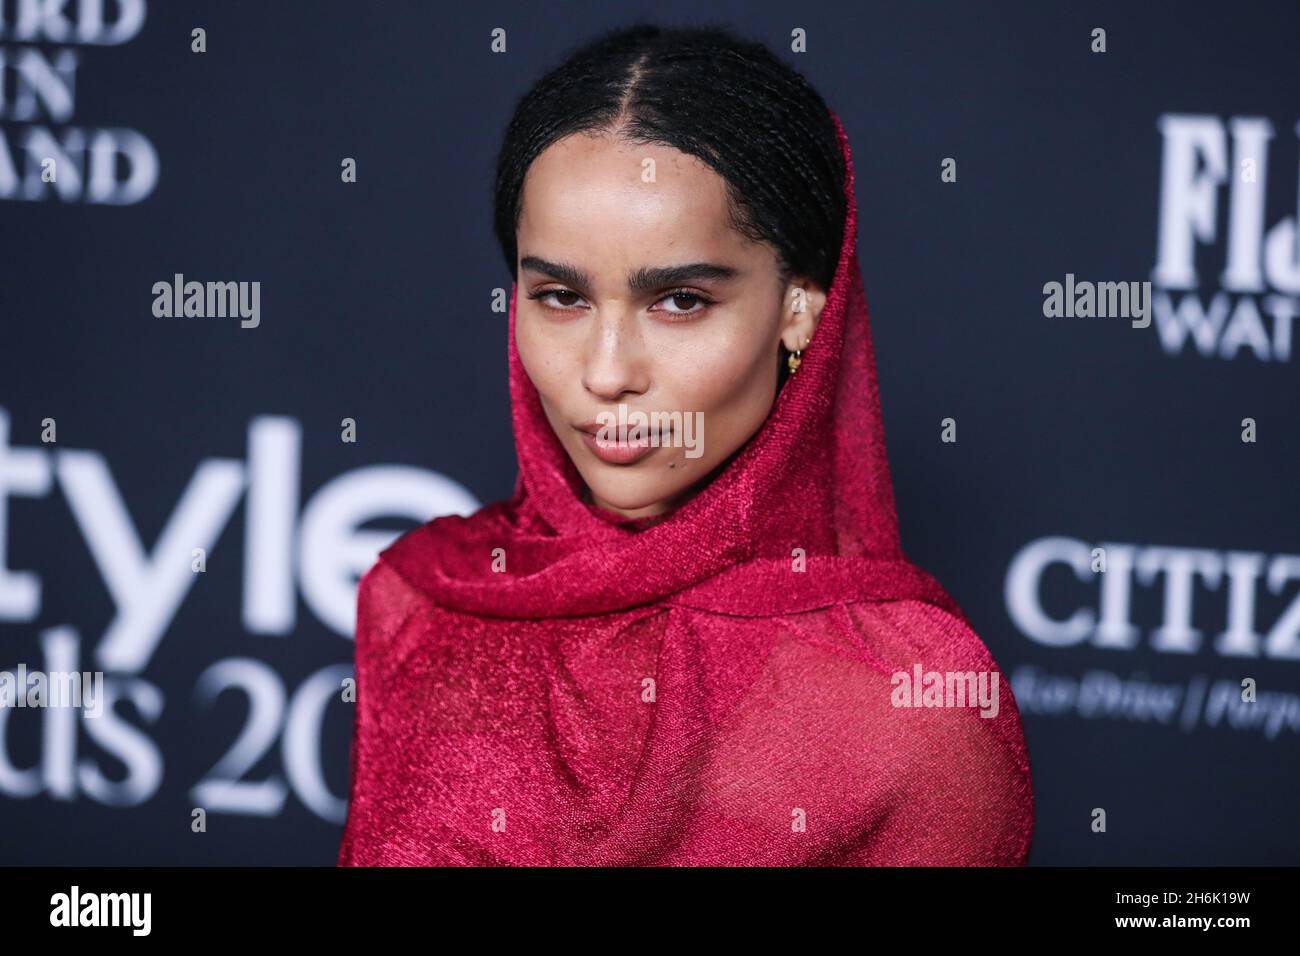 Los Angeles, United States. 15th Nov, 2021. LOS ANGELES, CALIFORNIA, USA - NOVEMBER 15: Actress Zoe Kravitz arrives at the 6th Annual InStyle Awards 2021 held at the Getty Center on November 15, 2021 in Los Angeles, California, United States. (Photo by Xavier Collin/Image Press Agency/Sipa USA) Credit: Sipa USA/Alamy Live News Stock Photo